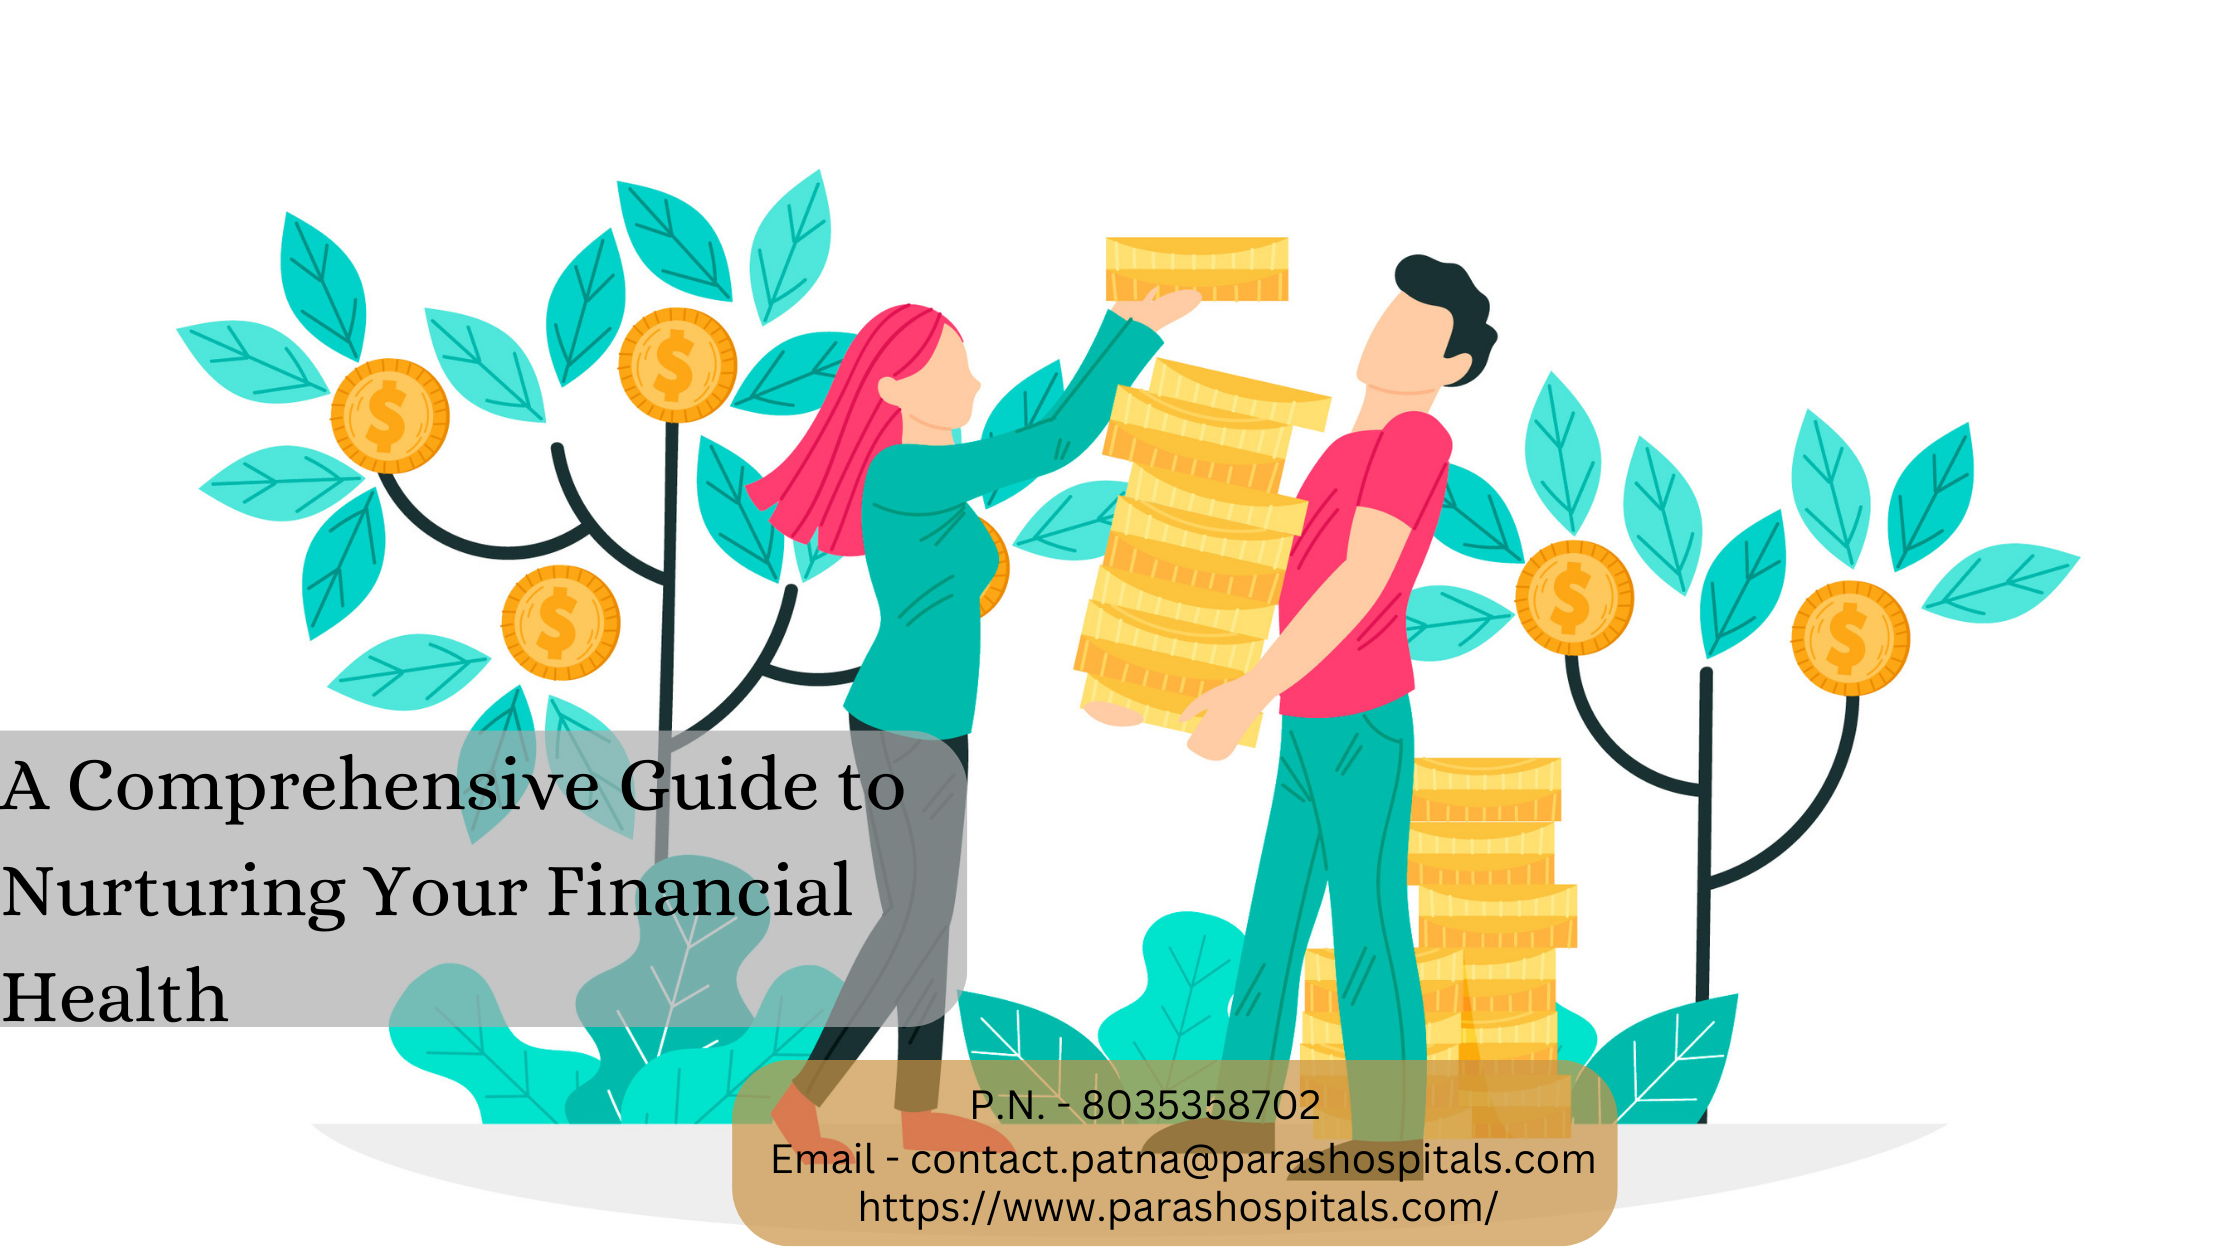 A Comprehensive Guide to Nurturing Your Financial Health